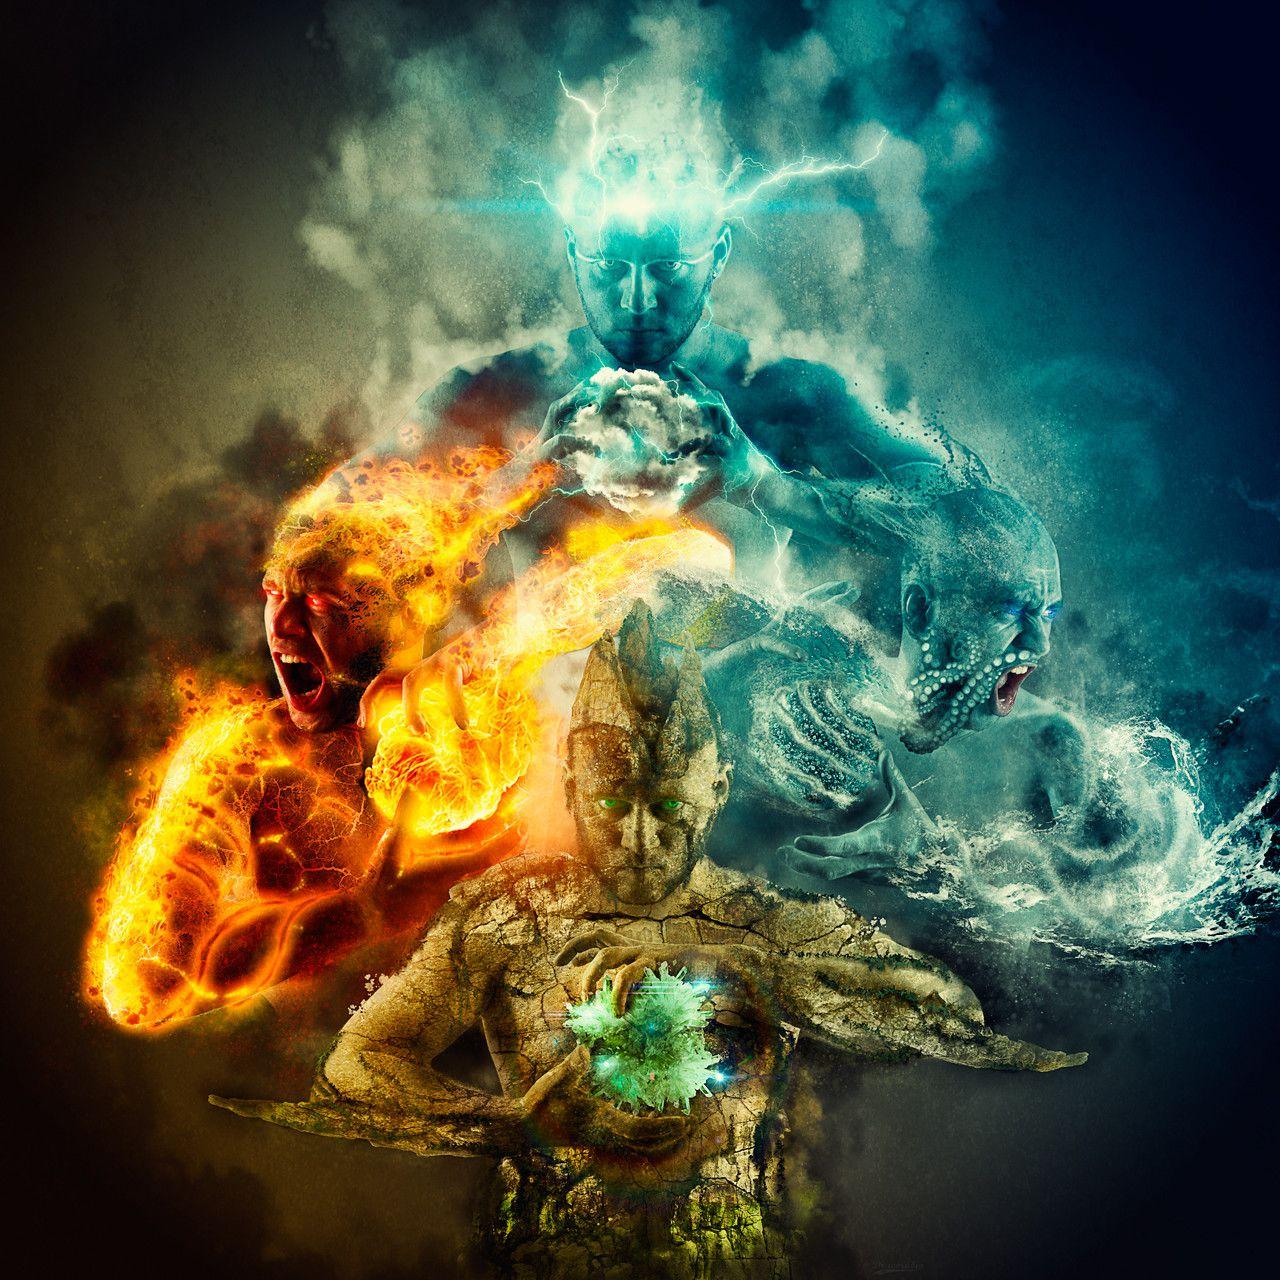 Which among the four elements represents you the most? based